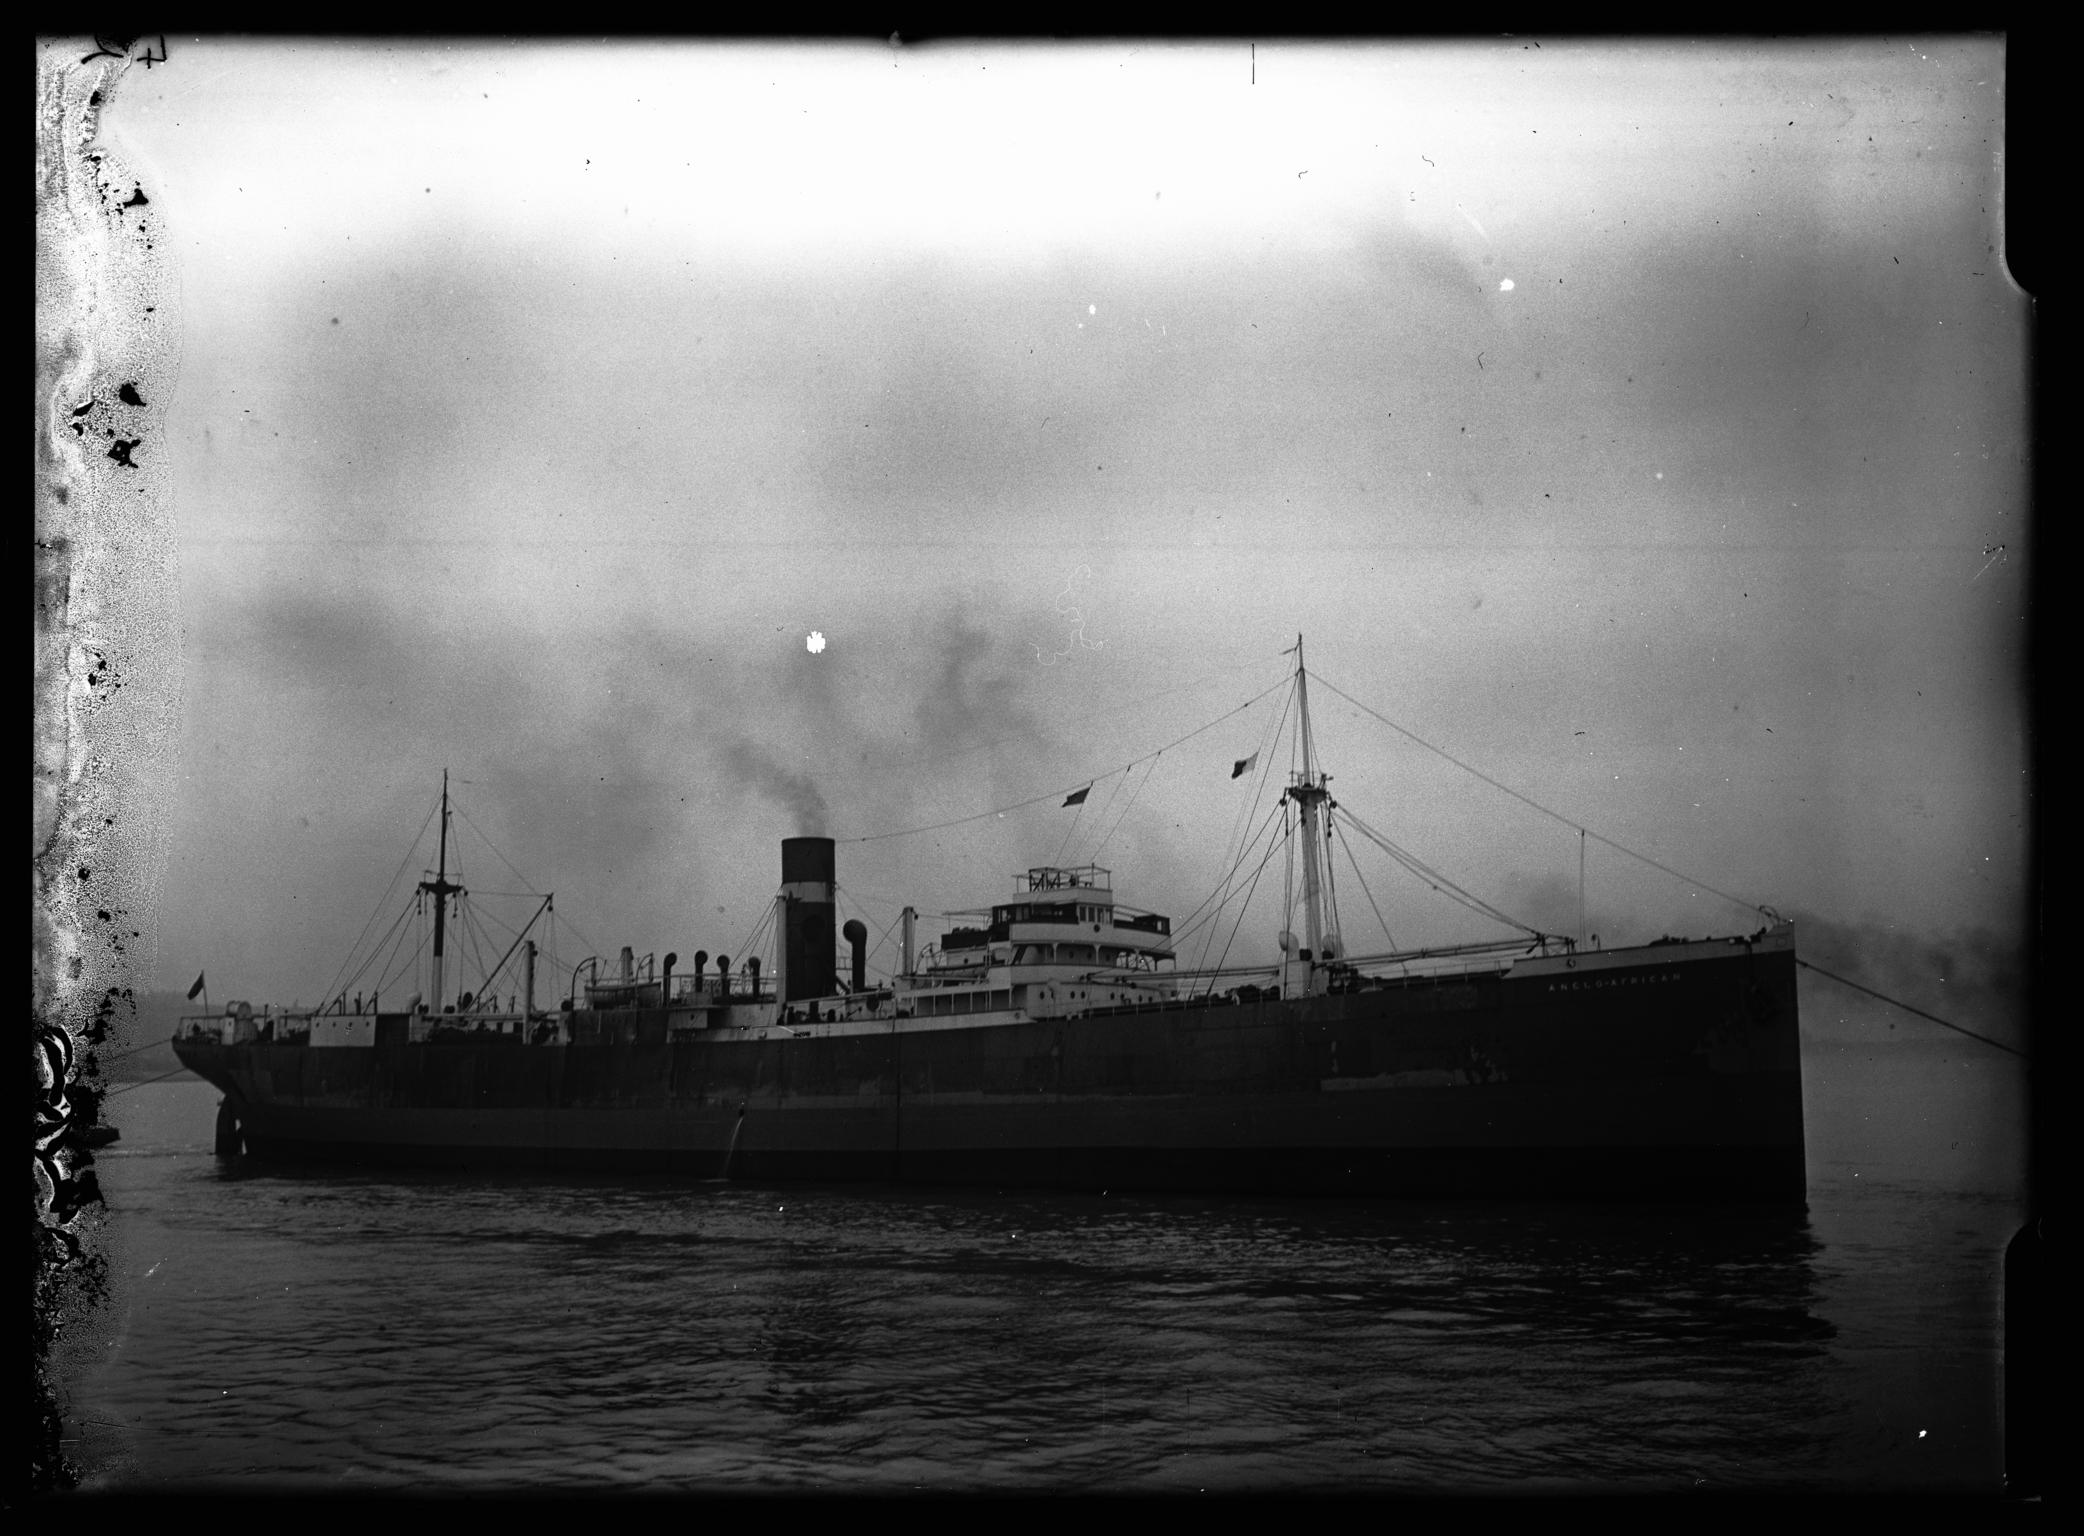 S.S. ANGLO-AFRICAN, glass negative